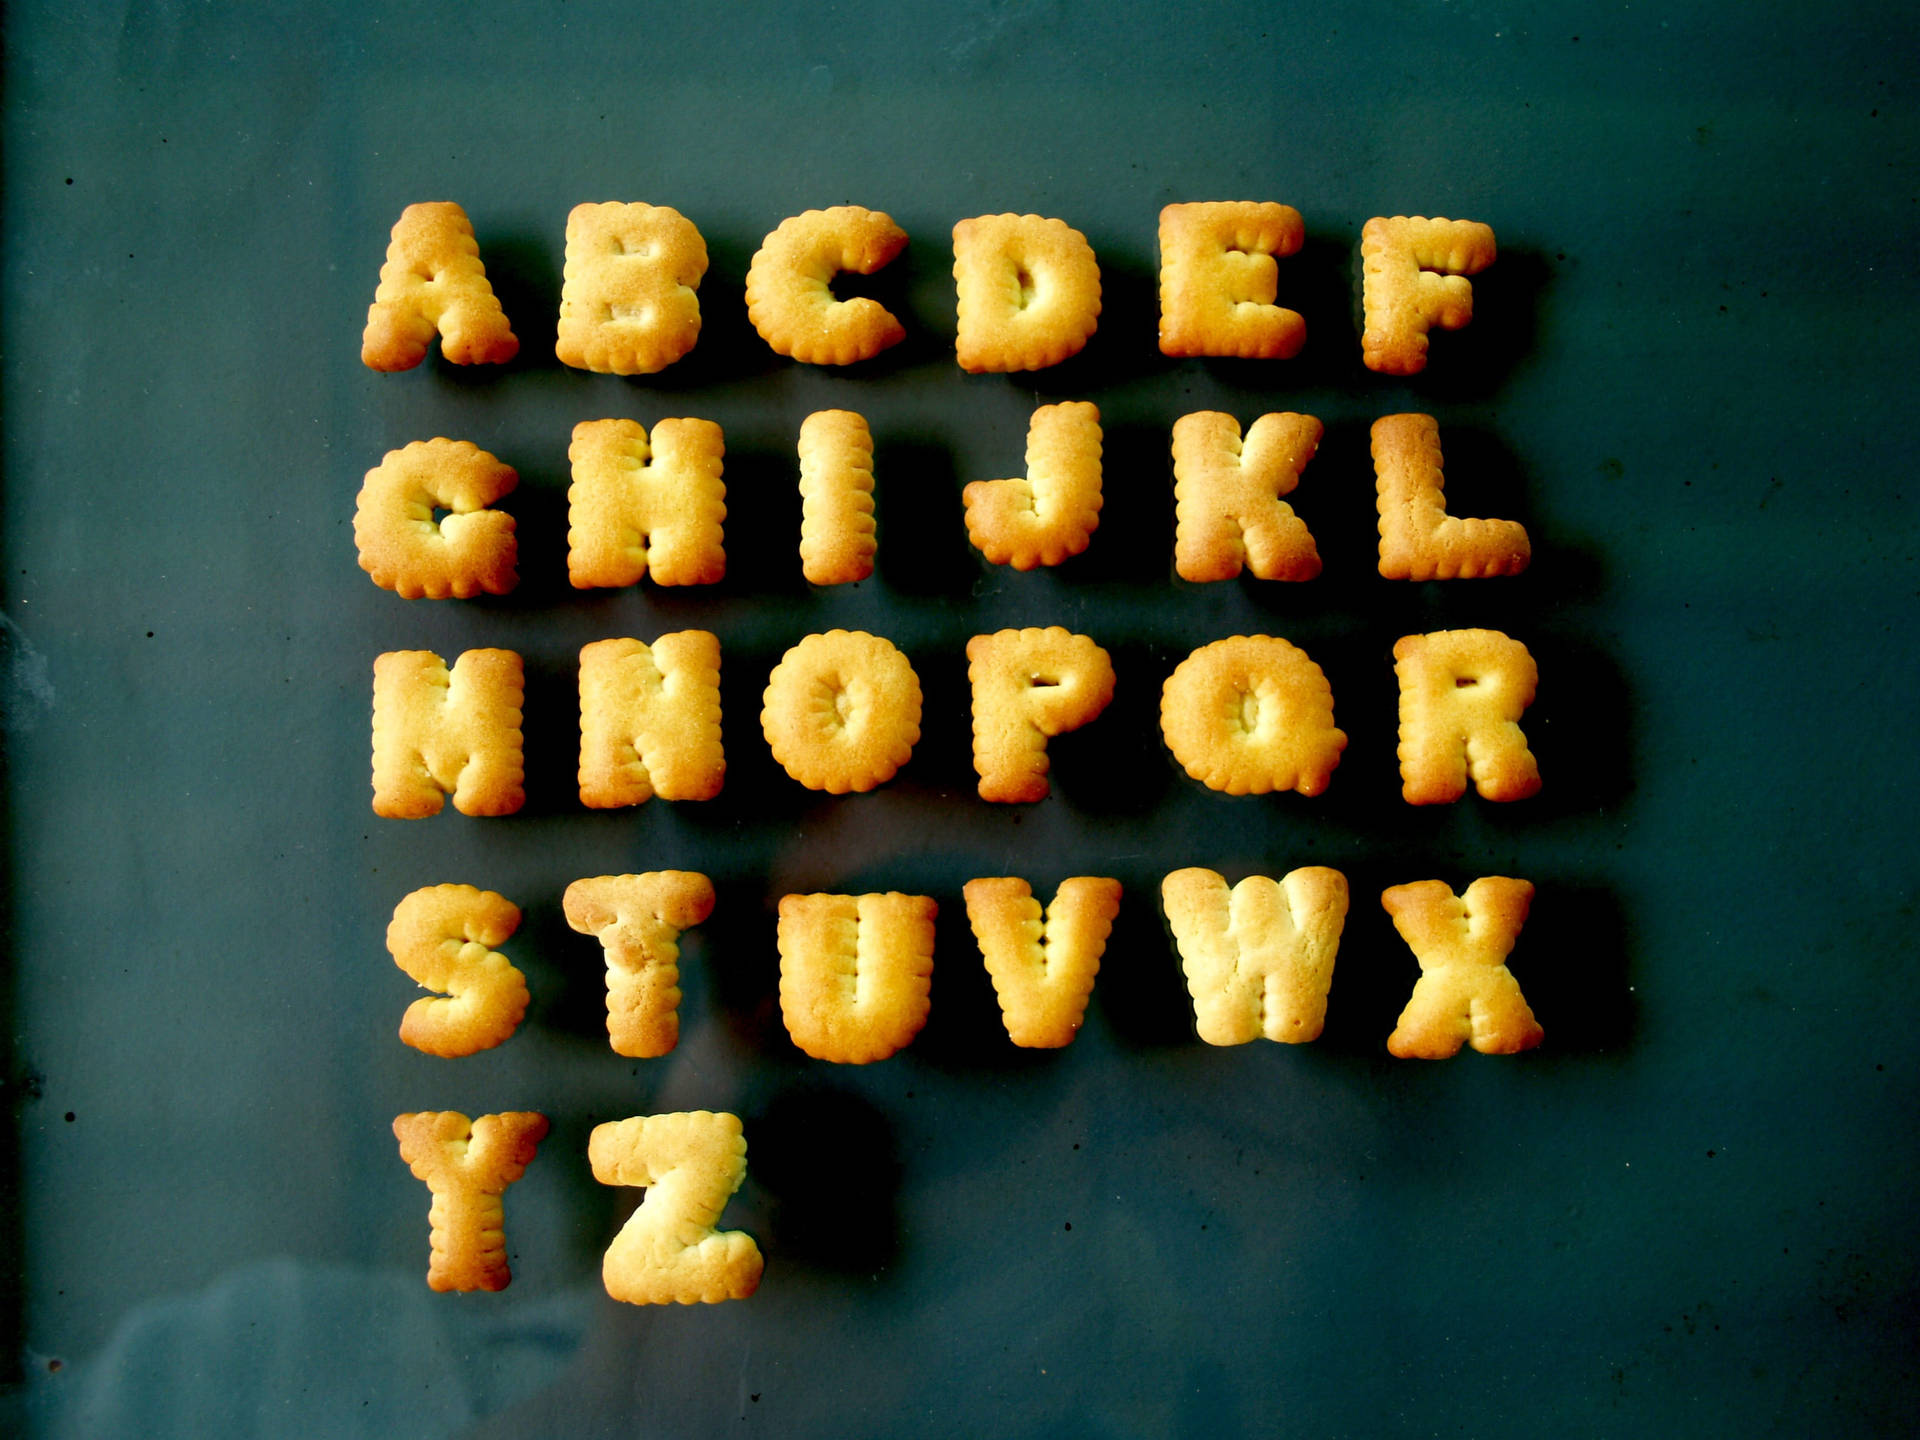 Educational ABC Alphabets Made from Crackers Wallpaper